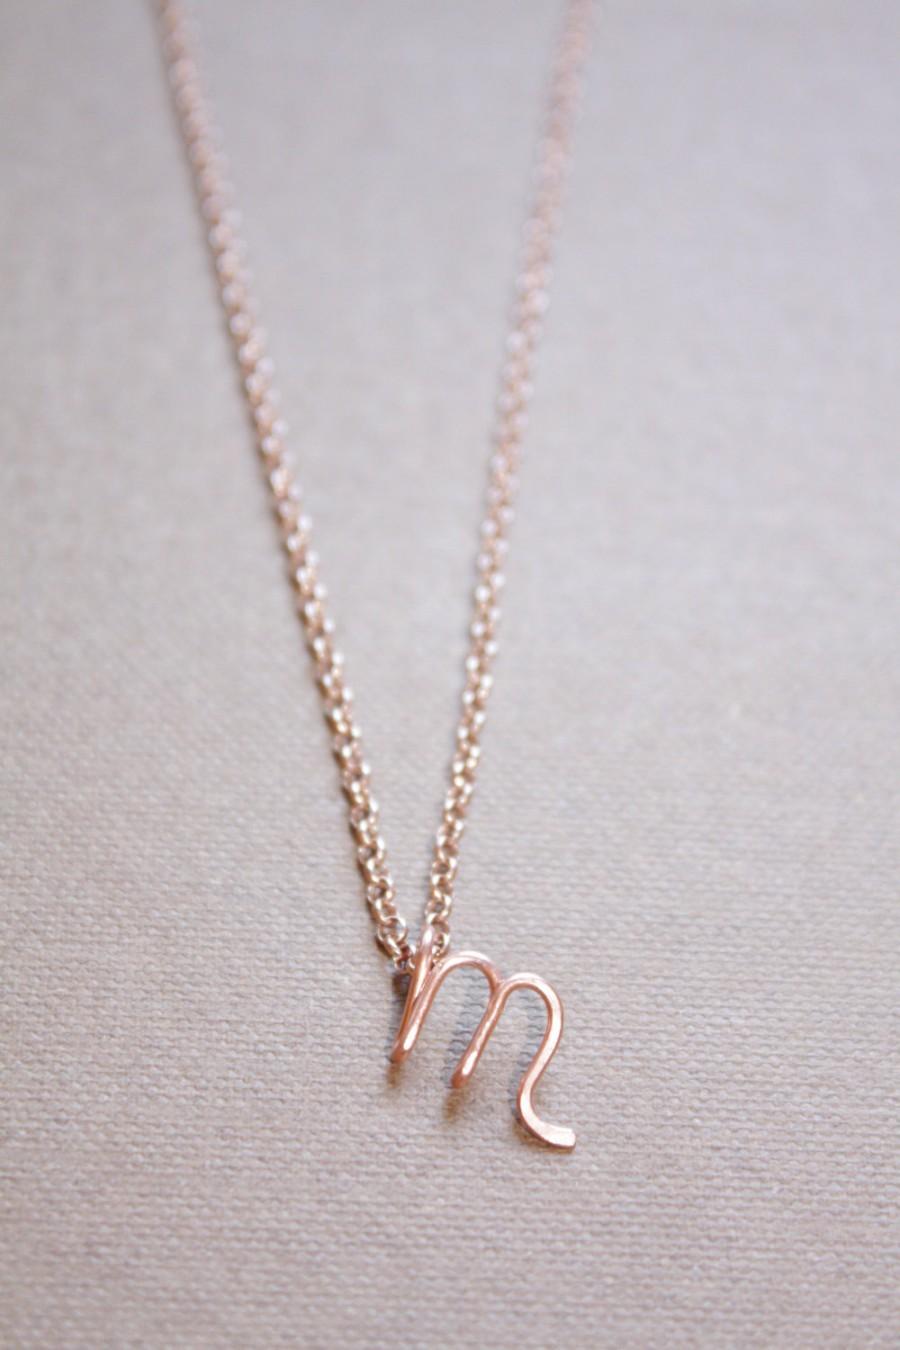 Mariage - Letter M Necklace Silver Gold Rose Gold Initial Necklace Cursive Letter Necklace, Lowercase Initial Necklace, Personalized Necklace, Di & De